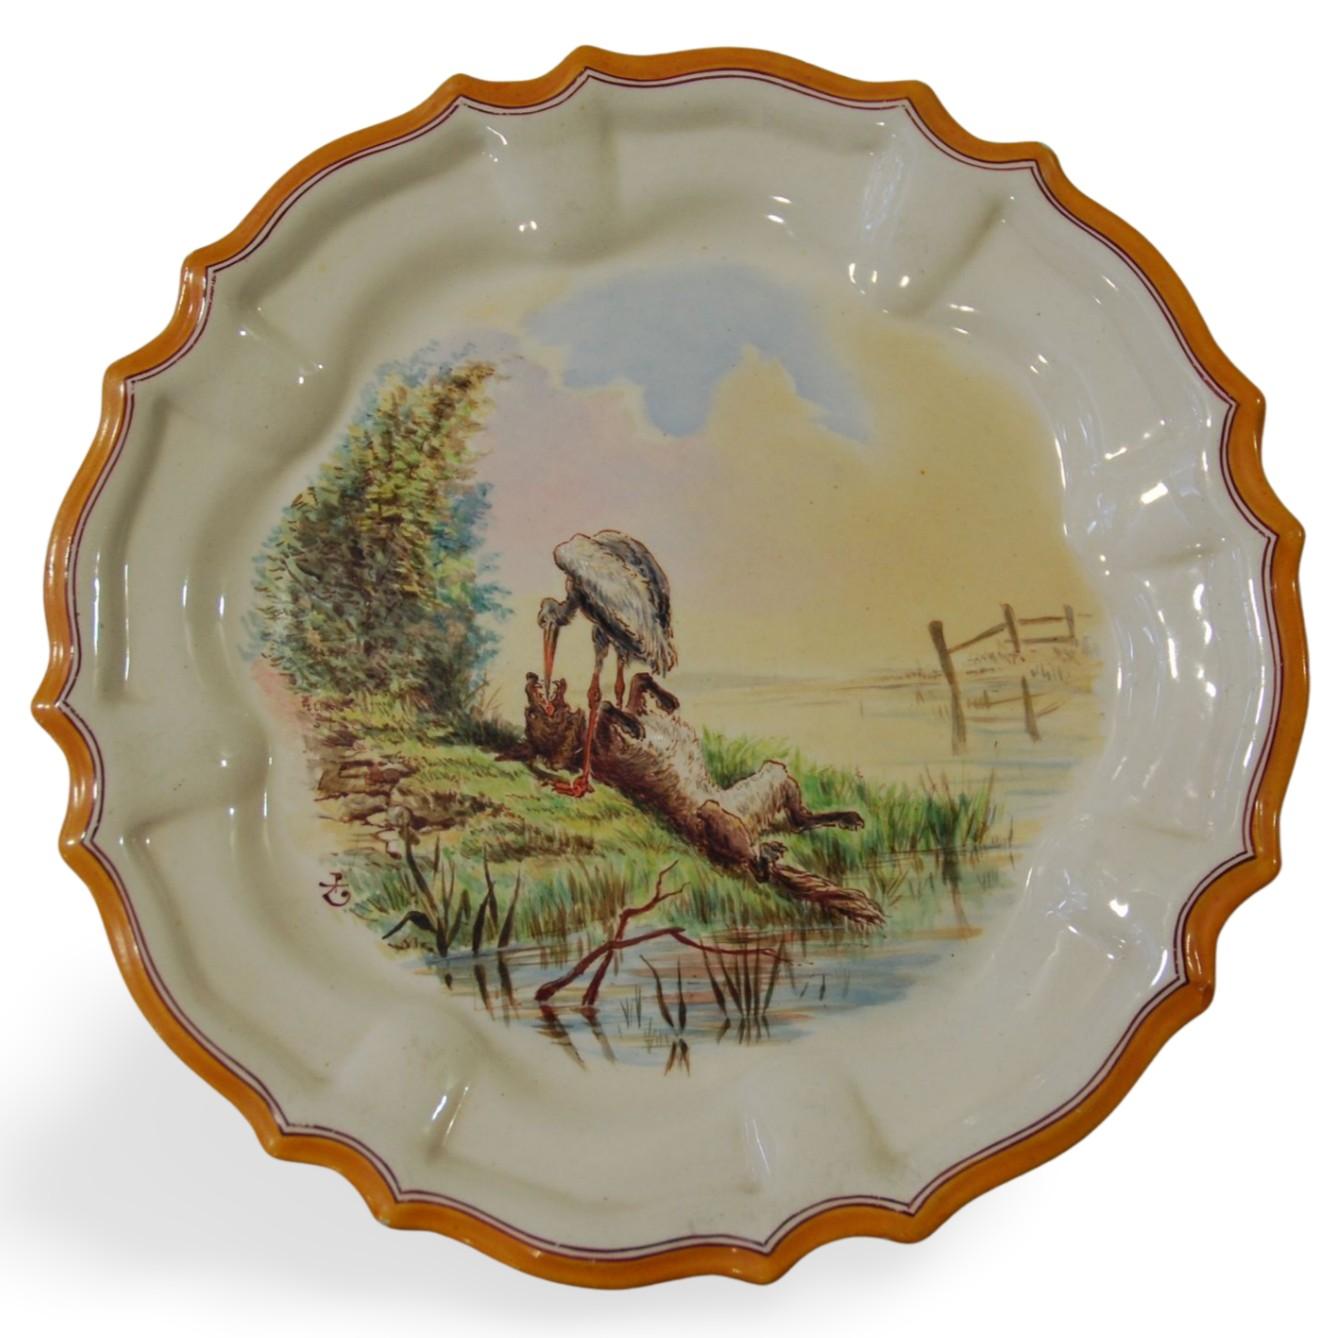 Set of 12 Plates, Aesop Fables, Wedgwood, circa 1860 For Sale 2